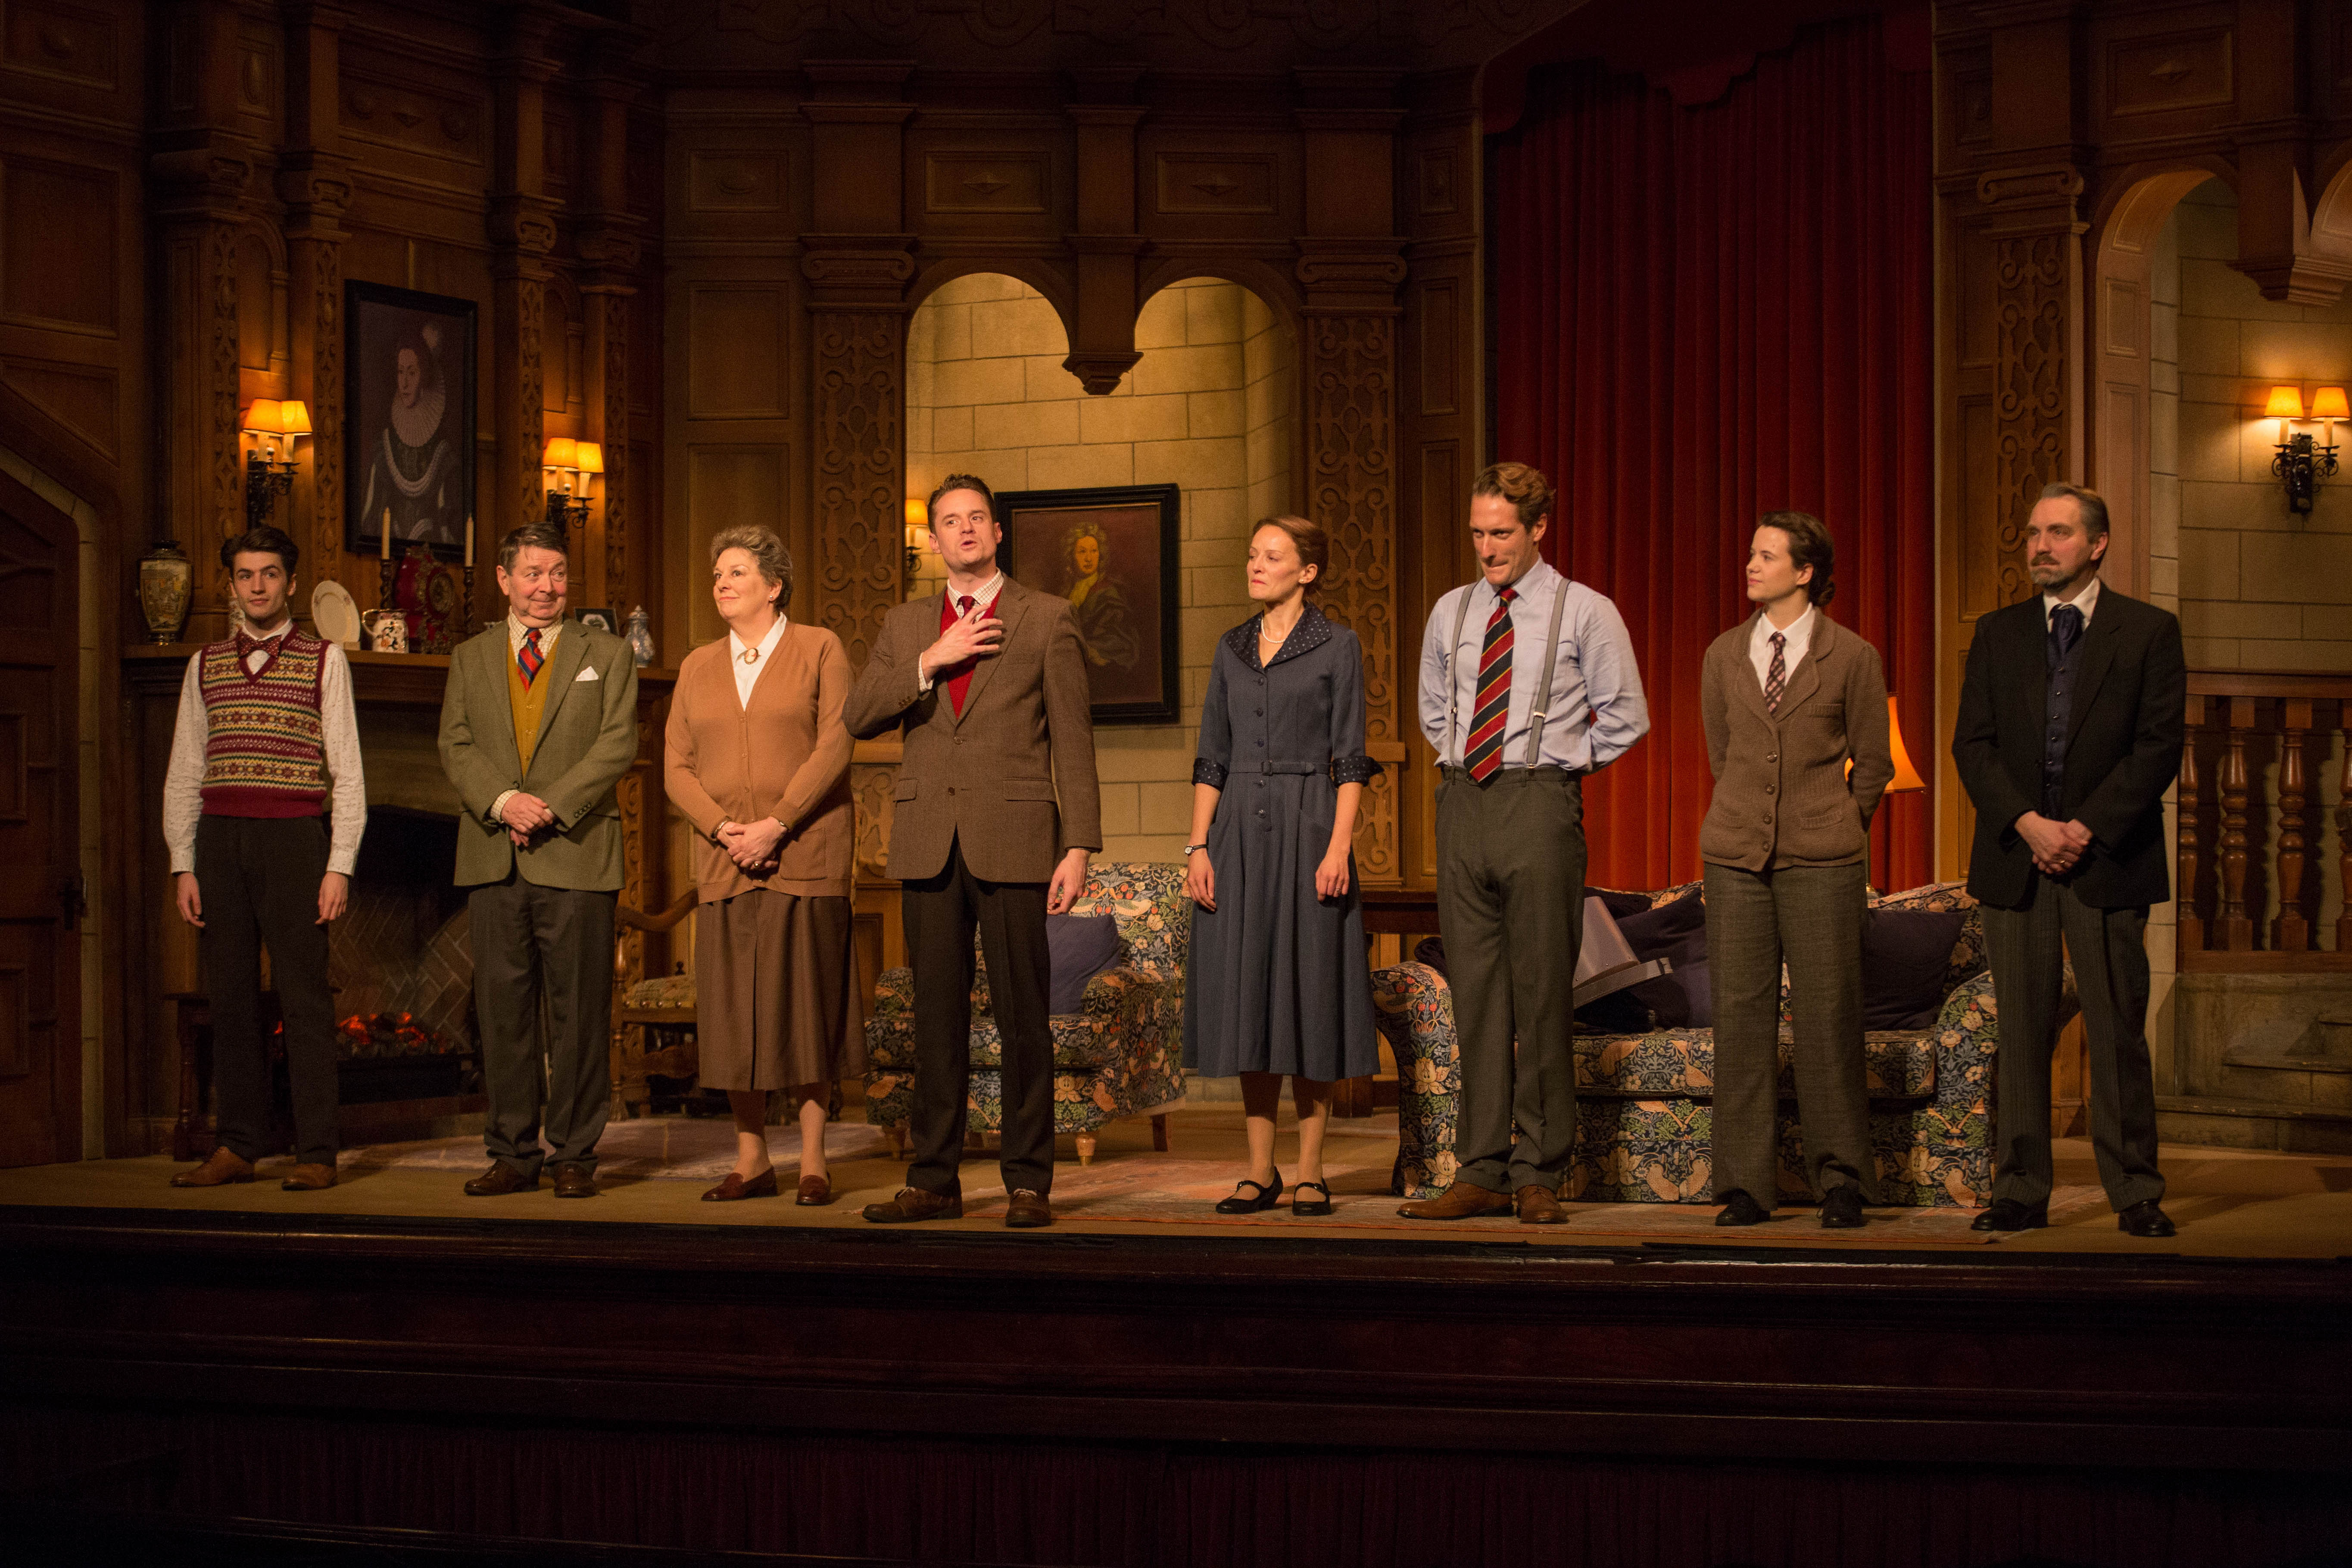 The cast of ‘The Mousetrap’.